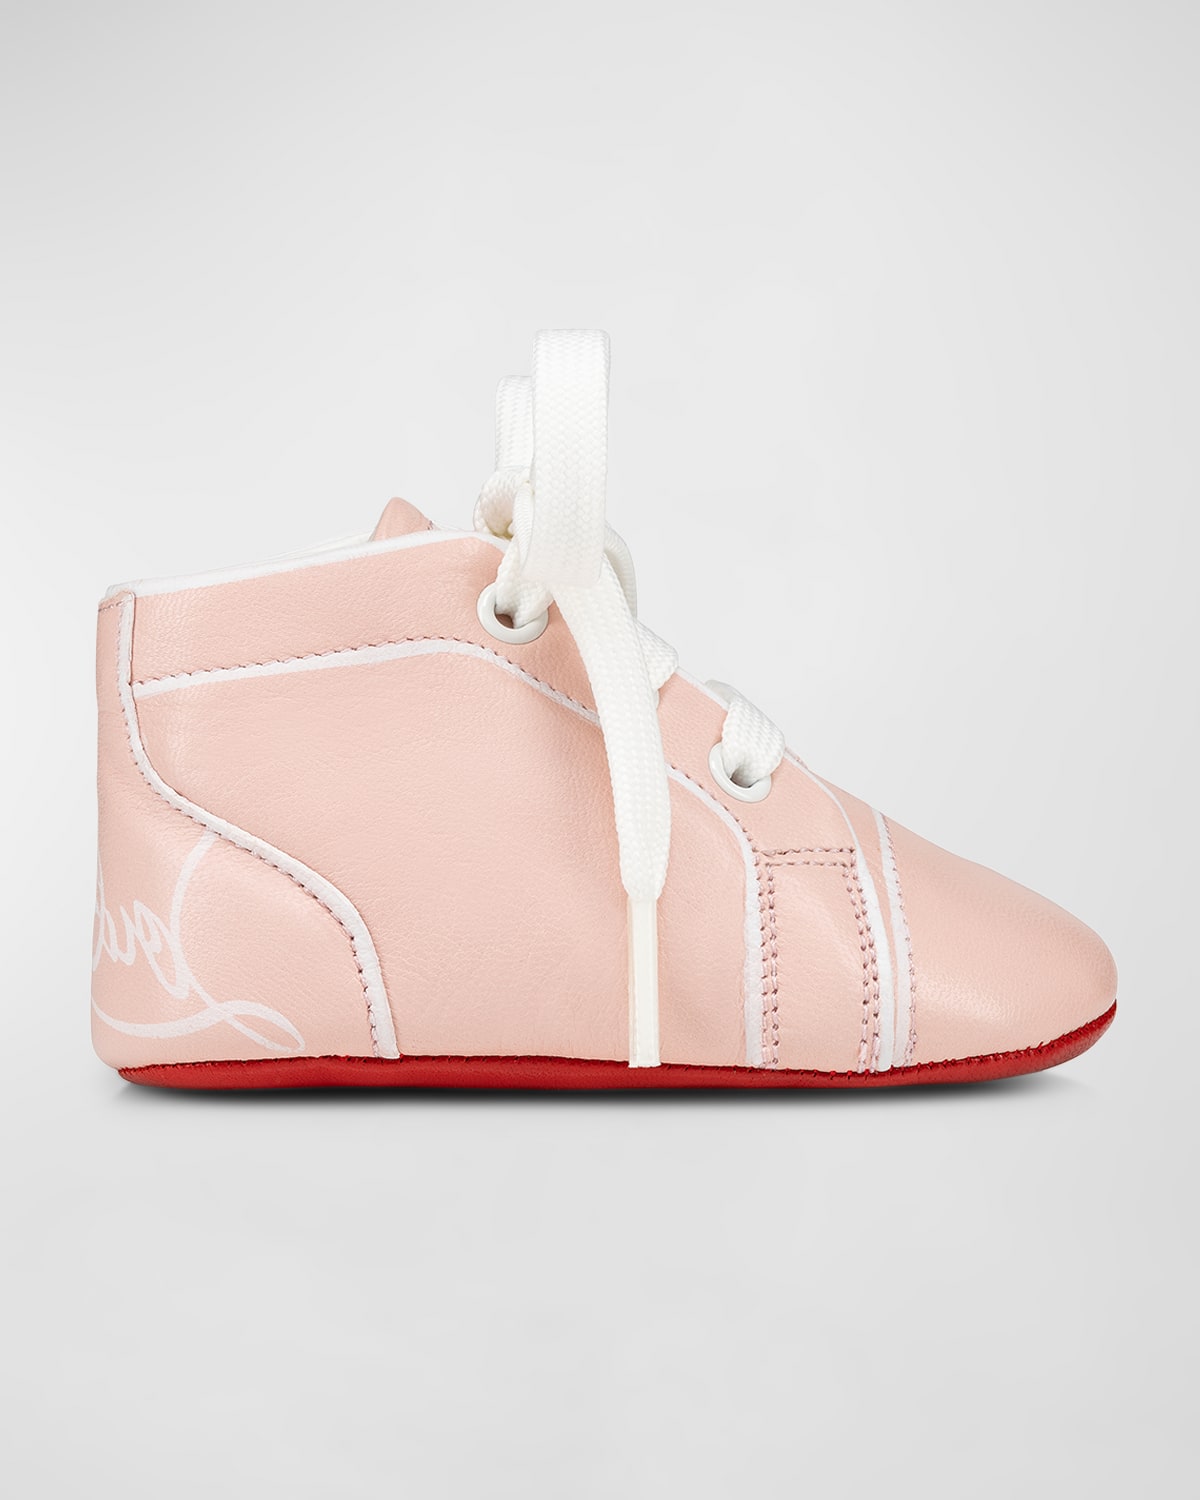 Christian Louboutin Kids' Girl's Funnytopi Suede Trainers, Baby In Rosy